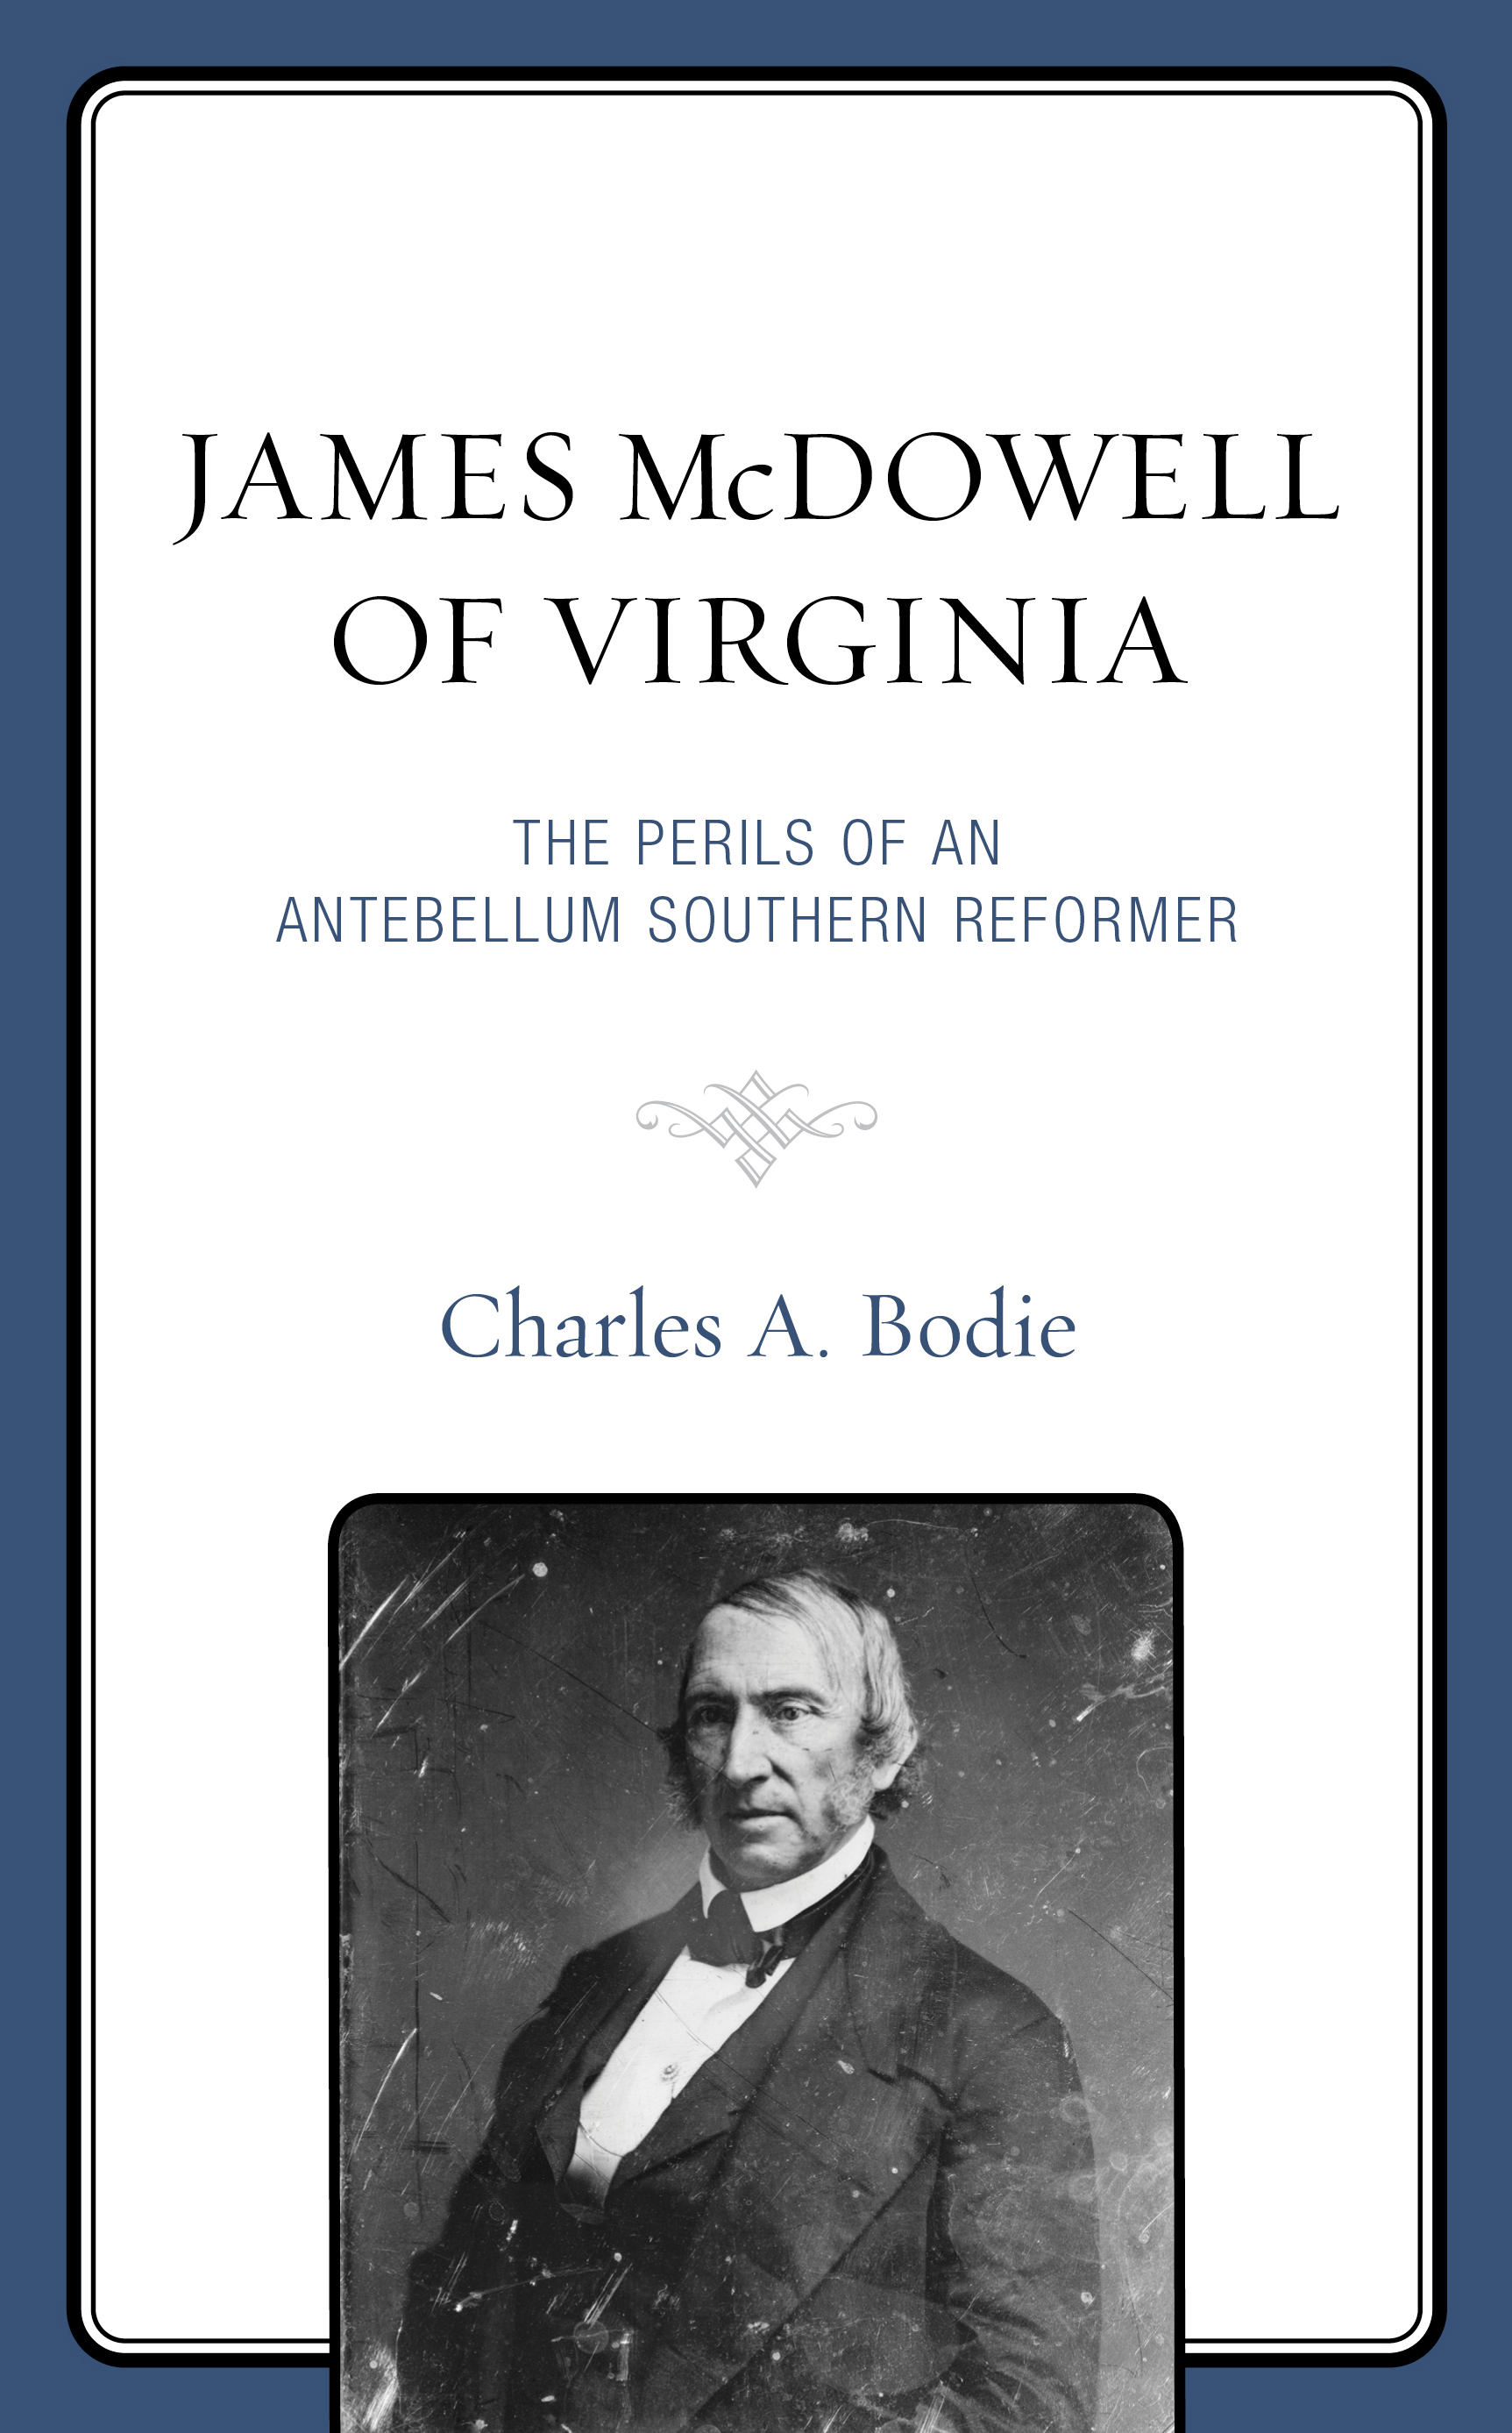 James McDowell of Virginia: The Perils of an Antebellum Southern Reformer